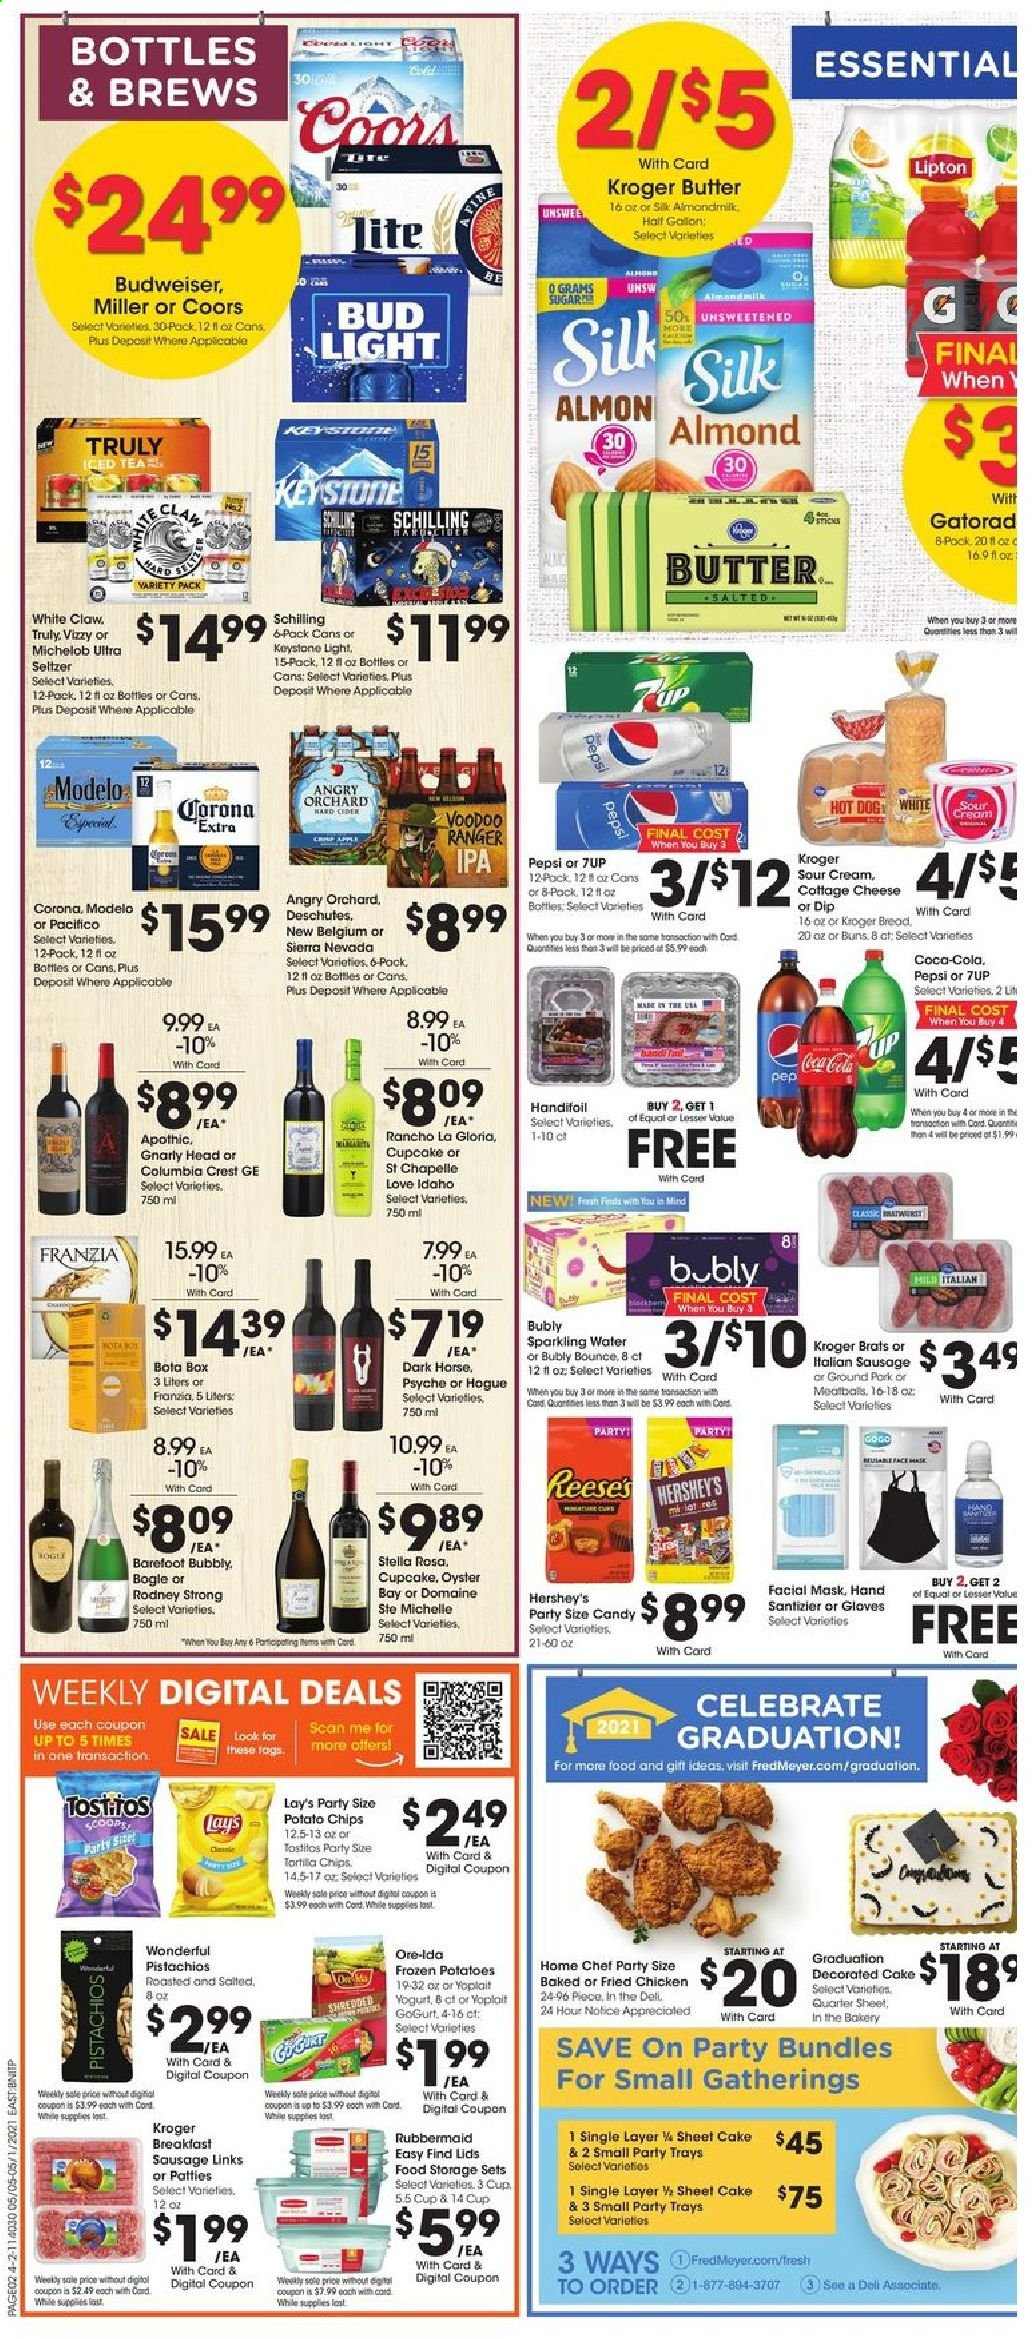 thumbnail - Fred Meyer Flyer - 05/05/2021 - 05/11/2021 - Sales products - Budweiser, Coors, Michelob, cake, buns, cupcake, oysters, hot dog, fried chicken, sausage, italian sausage, cottage cheese, yoghurt, Yoplait, almond milk, Silk, butter, sour cream, dip, Reese's, Hershey's, Ore-Ida, potato chips, Lay’s, sugar, pistachios, Coca-Cola, Pepsi, Lipton, ice tea, 7UP, seltzer water, sparkling water, White Claw, TRULY, beer, Bud Light, Corona Extra, Miller, IPA, Keystone, Modelo, ground pork, Bounce, Crest, cup. Page 1.